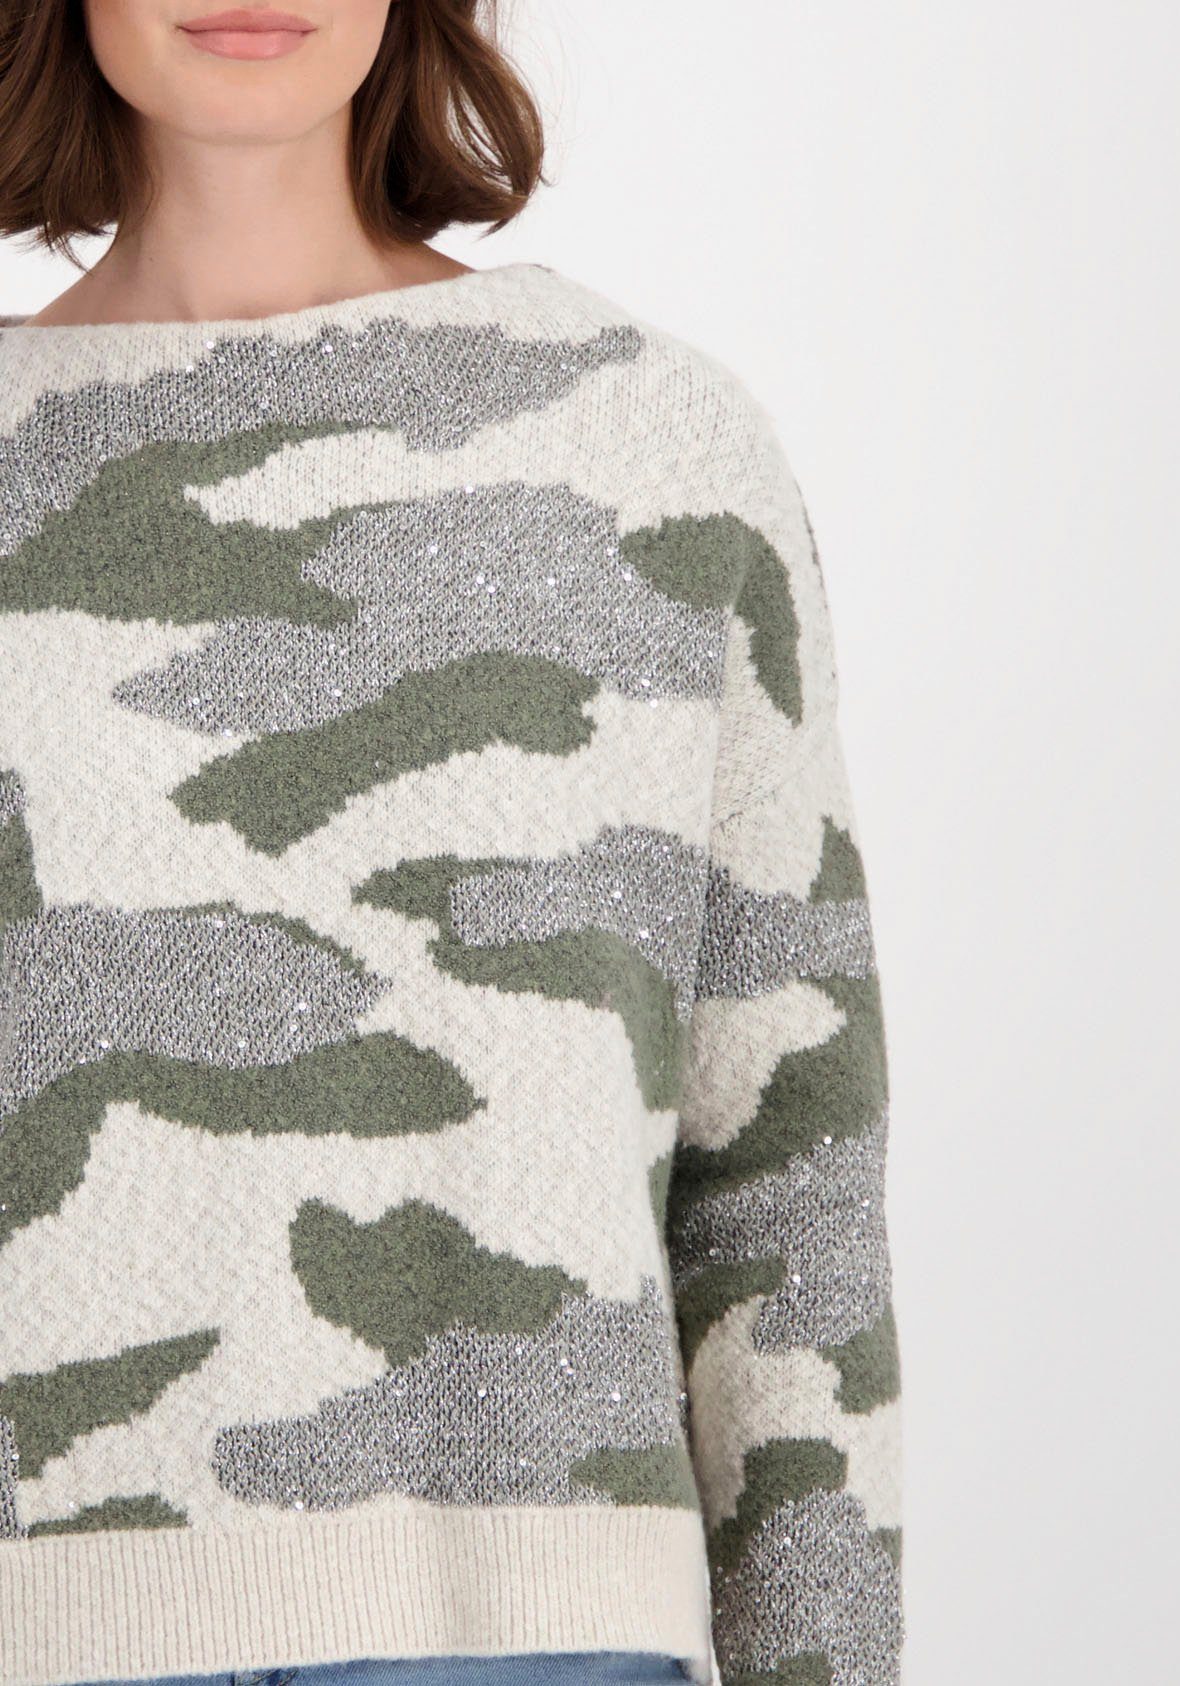 Camouflage Pullover Camouflage Muster in Monari Strickpullover